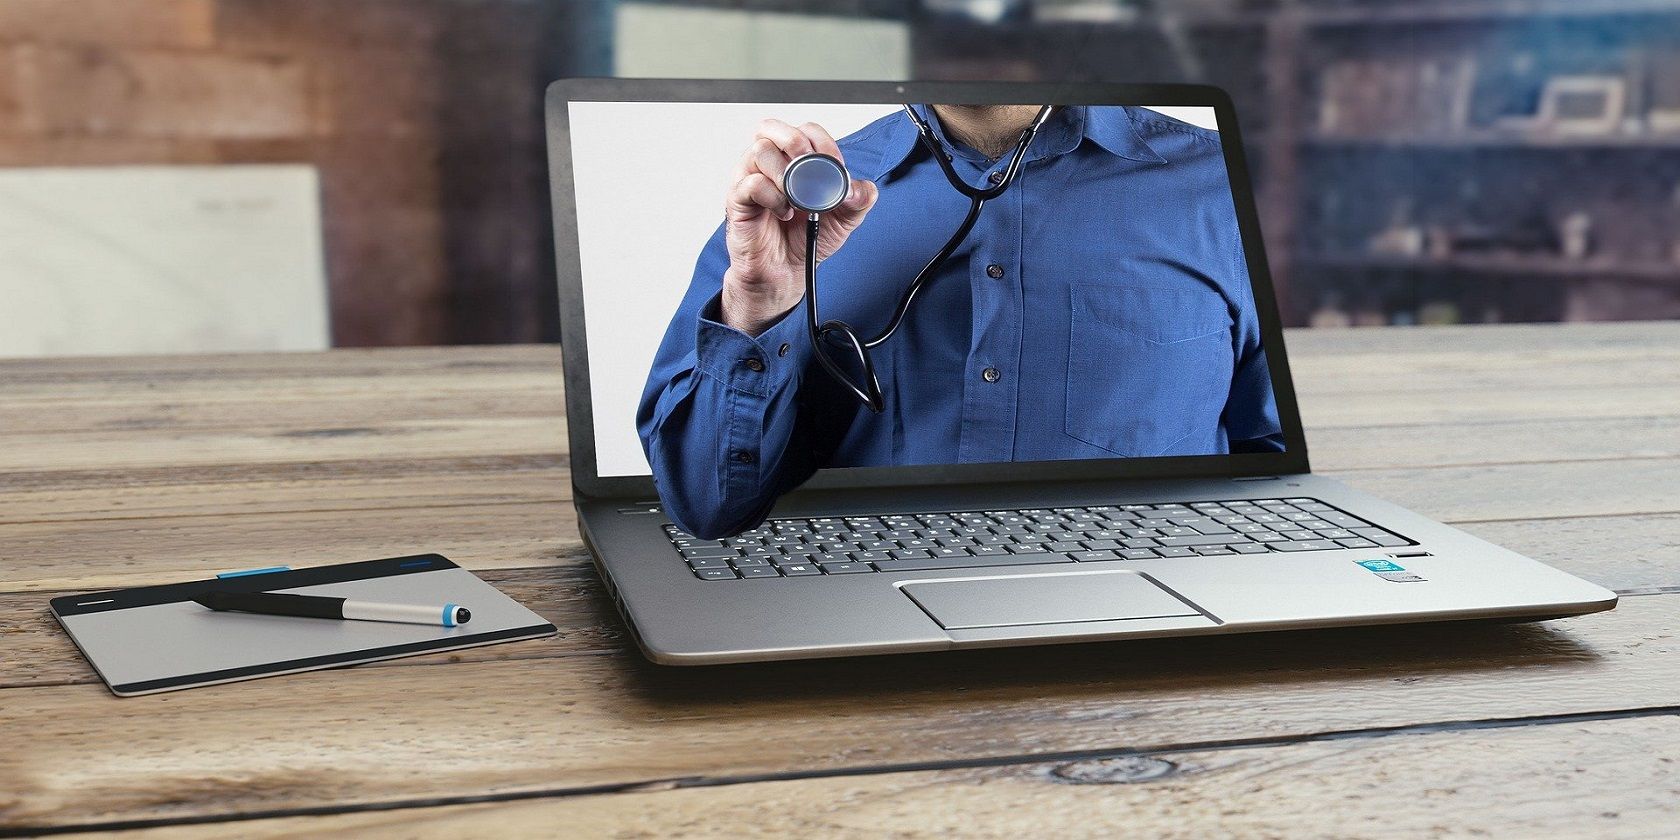 Doctor showing on a laptop, holding a stethoscope 